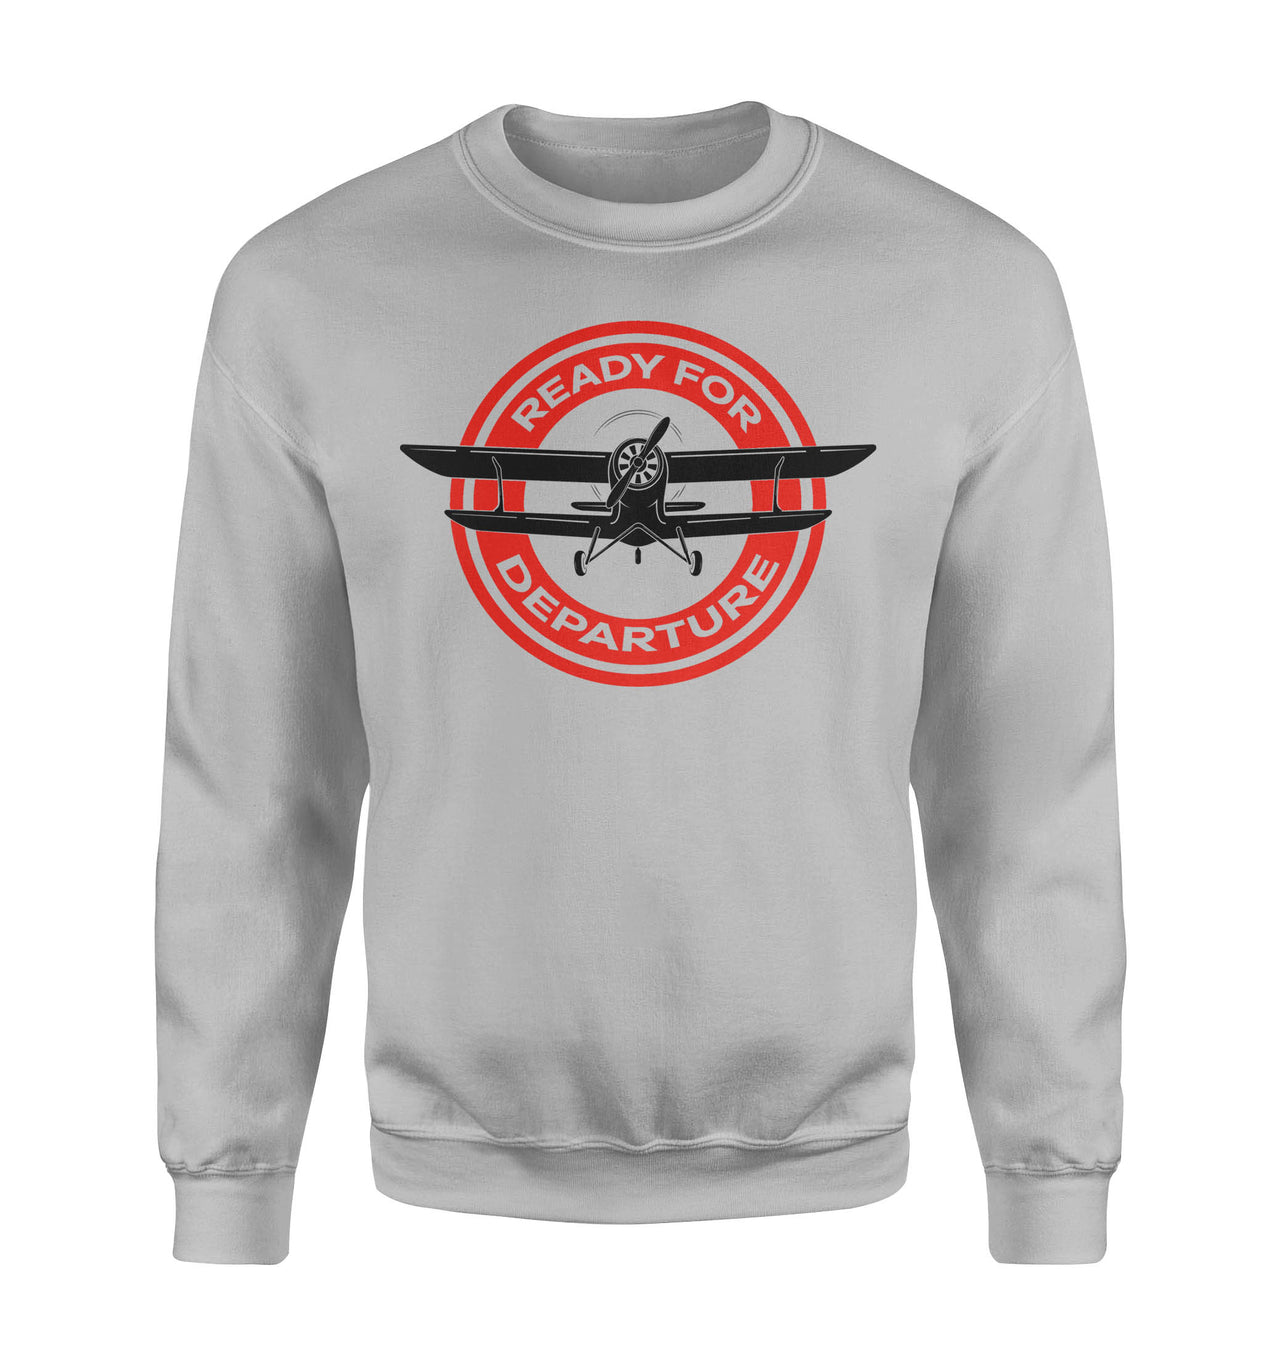 Ready for Departure Designed Sweatshirts